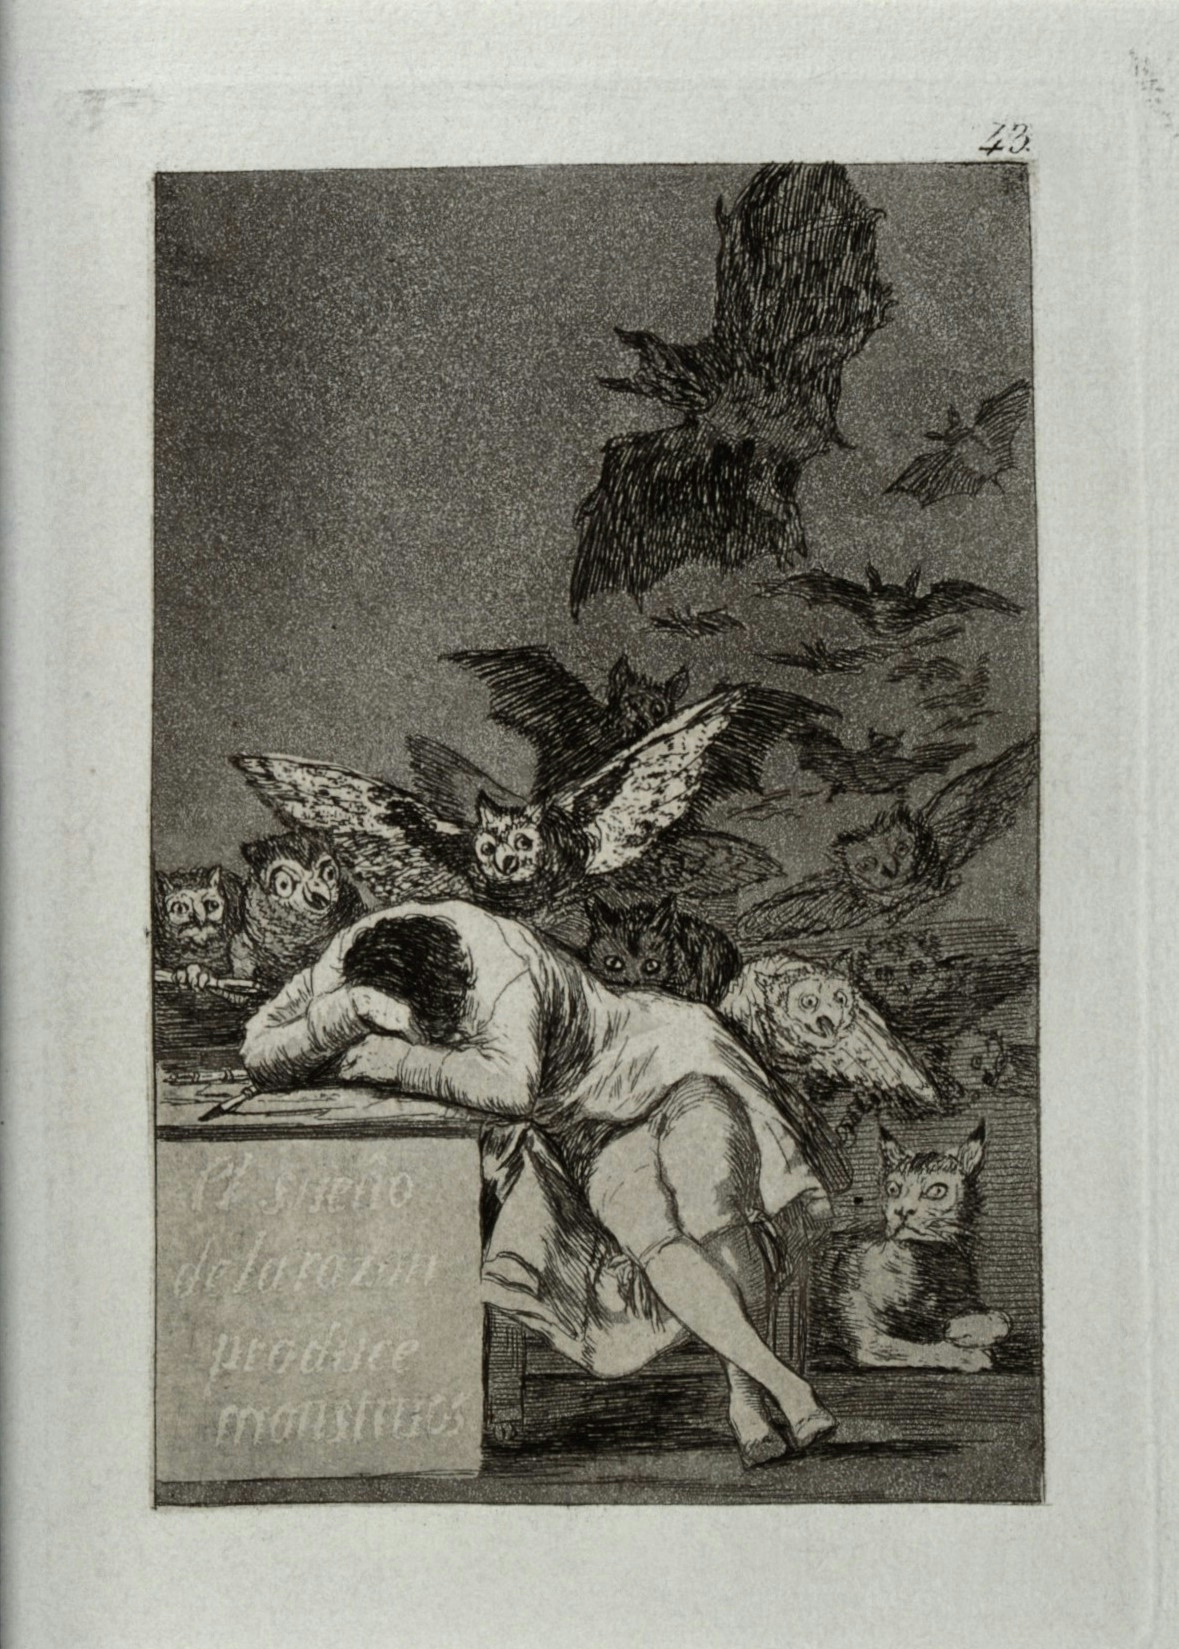 Black and white image of a seated man with his head in his arms, resting on a table. Owls and bats swarm behind him.